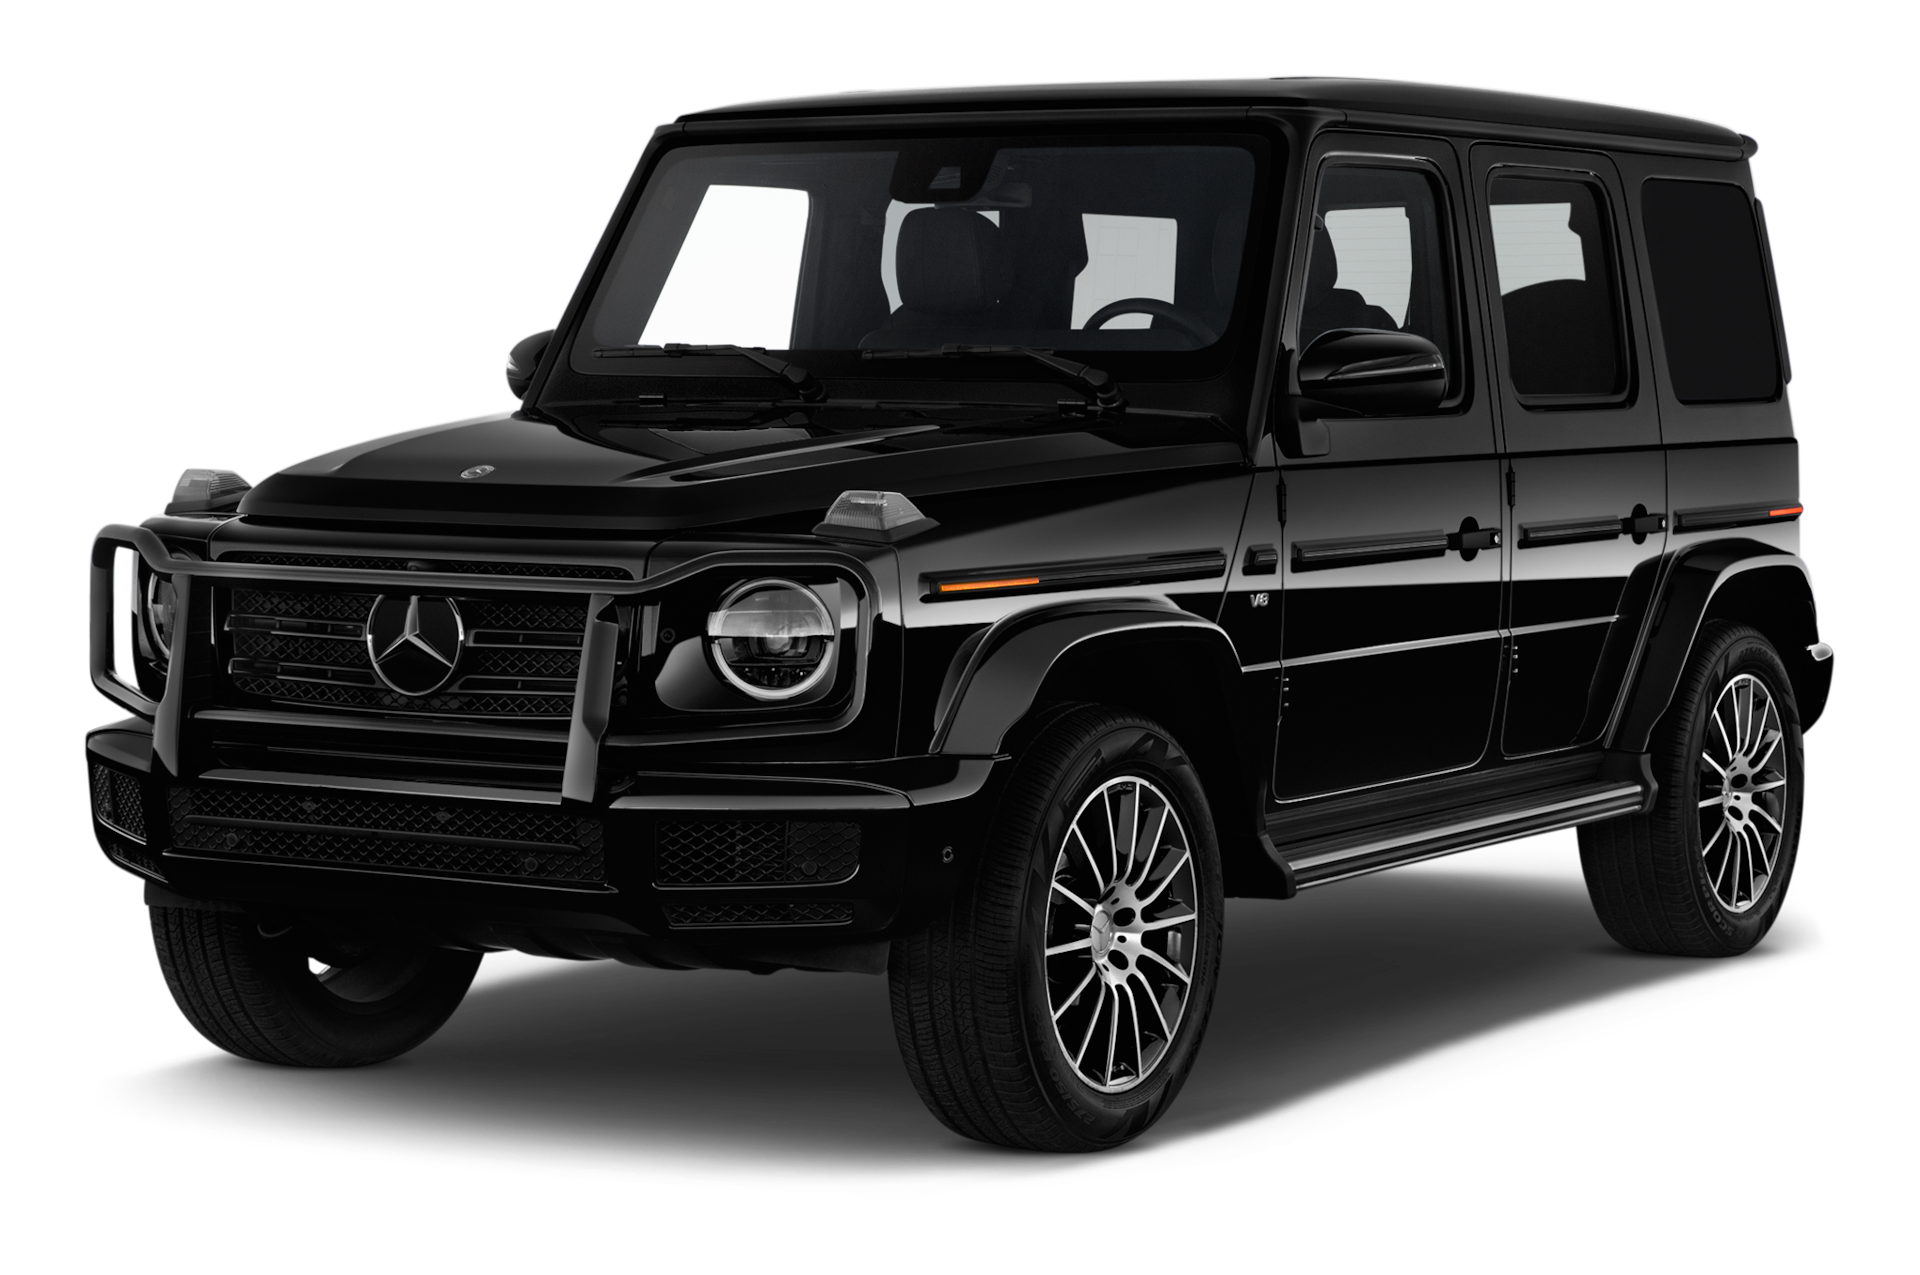 2019 Mercedes-Benz G-Class Prices, Reviews, and Photos - MotorTrend